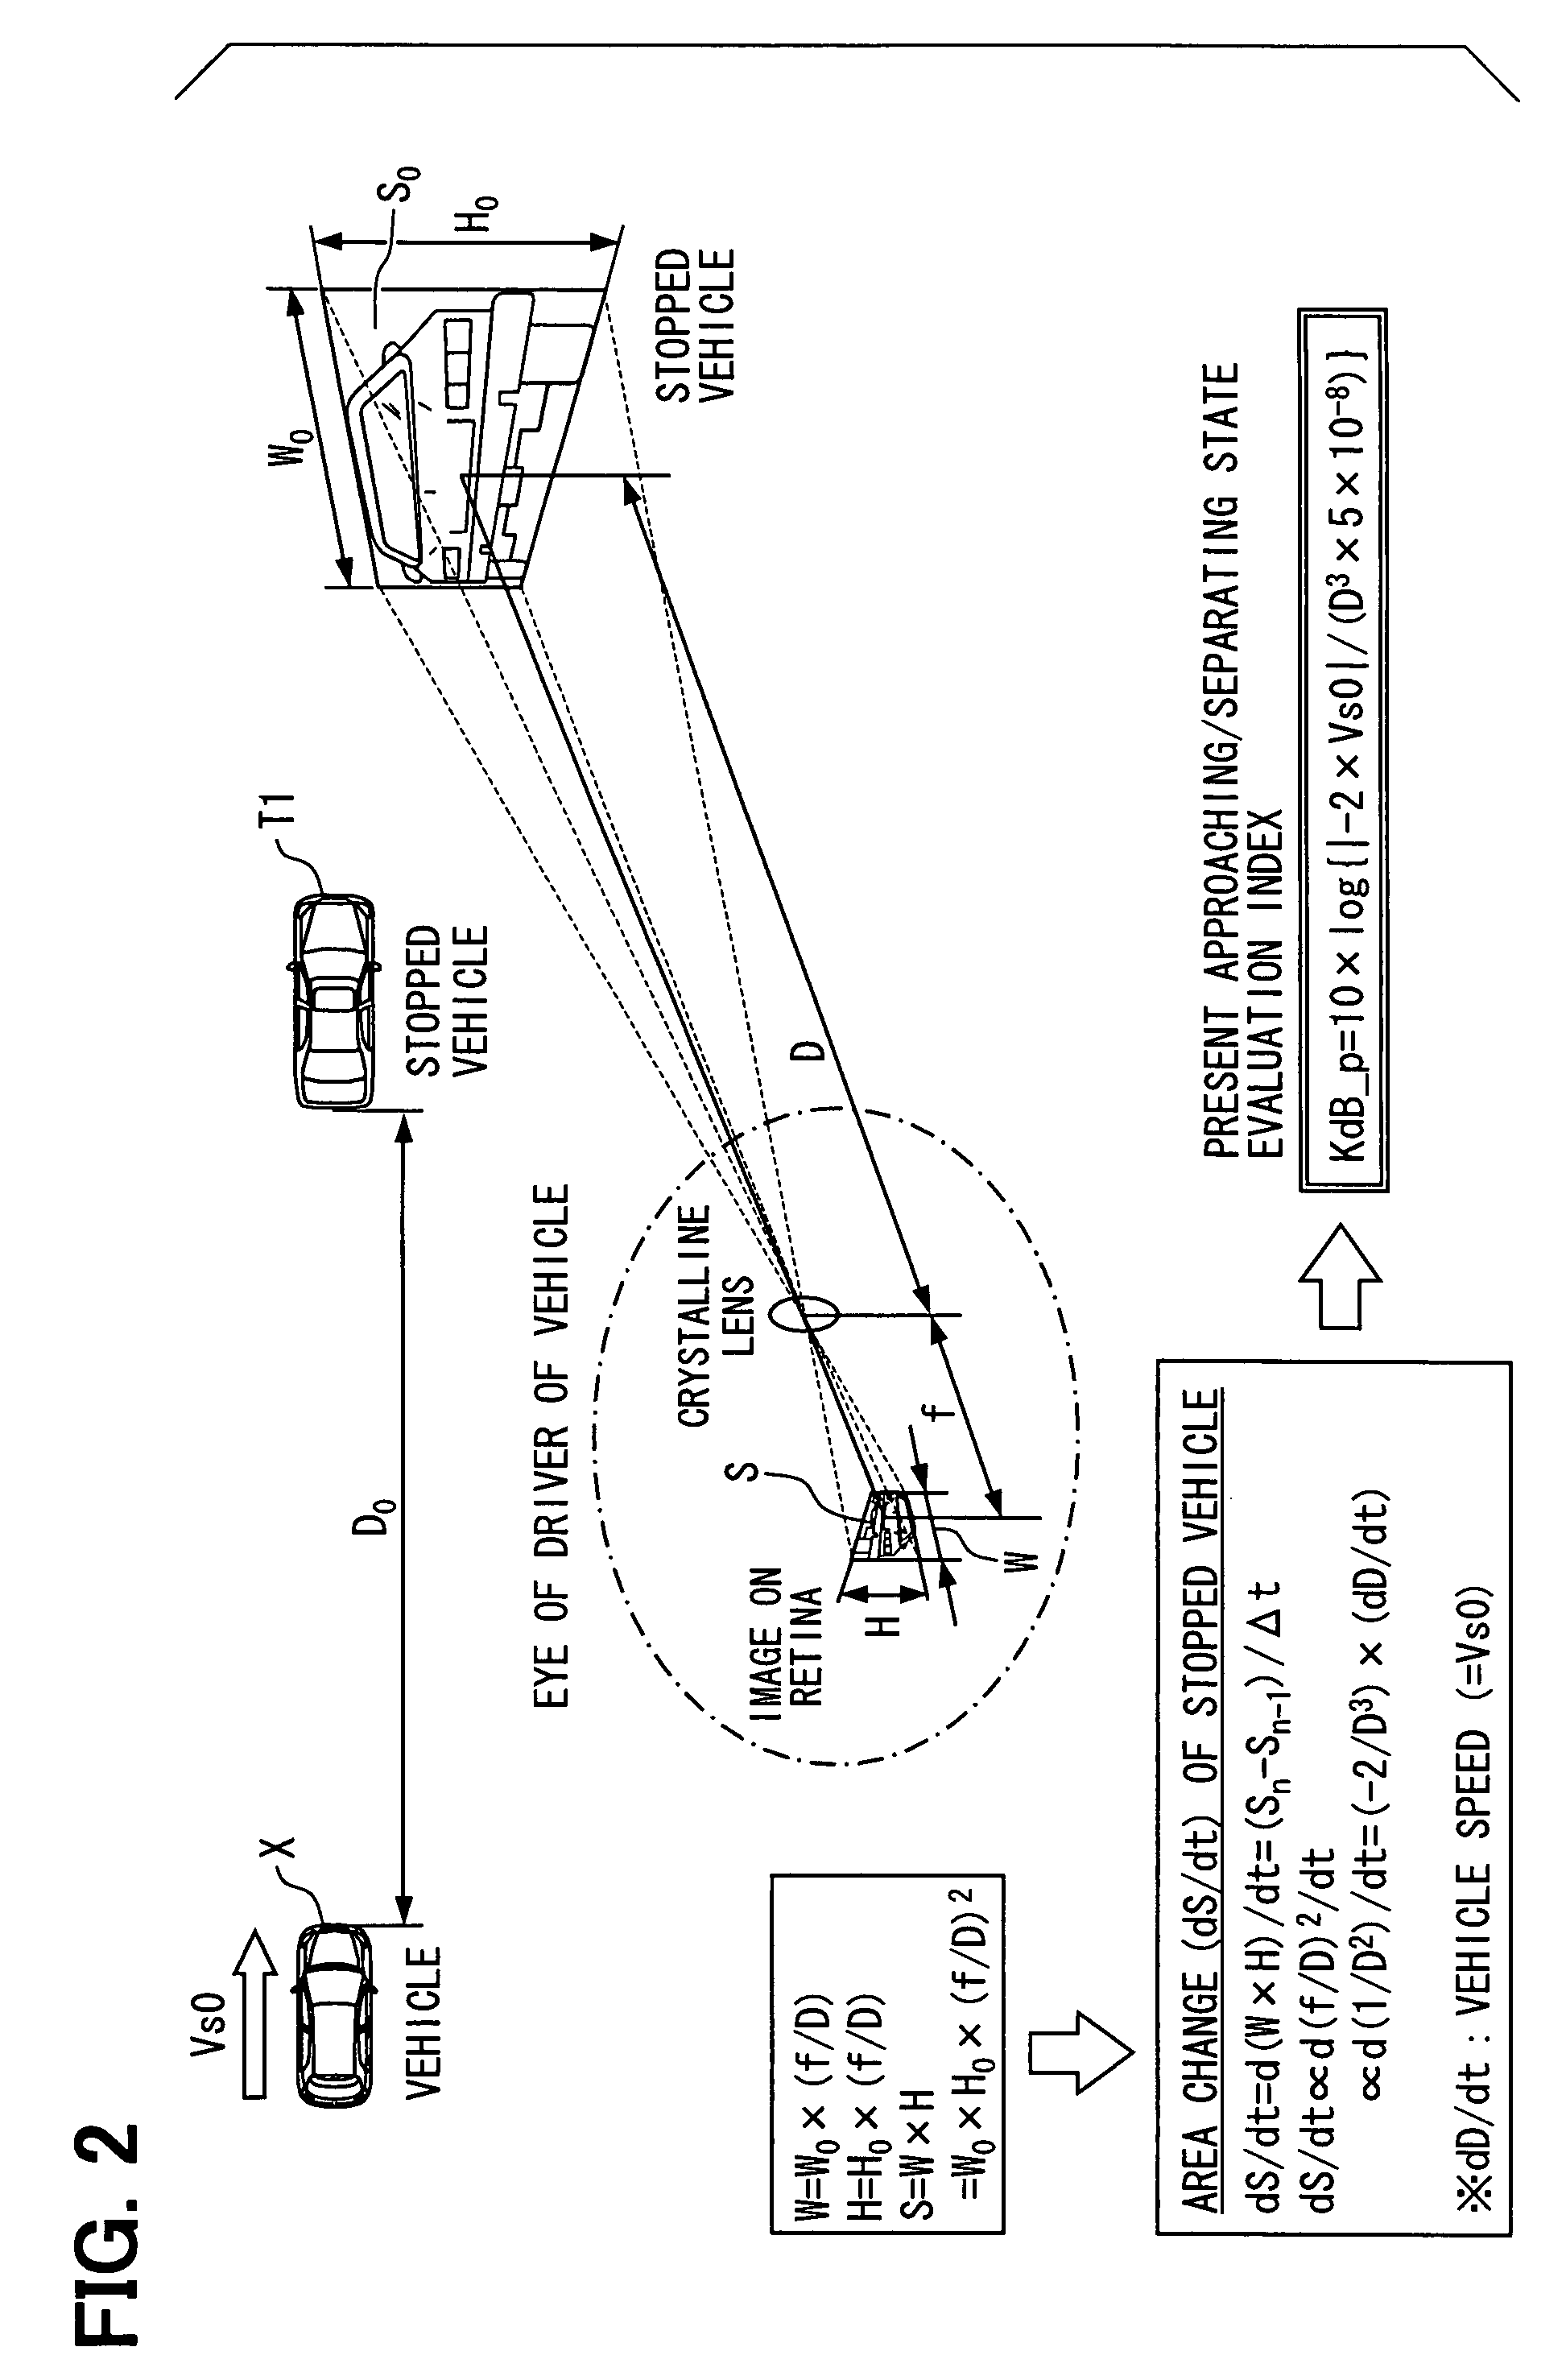 Target speed control system for a vehicle